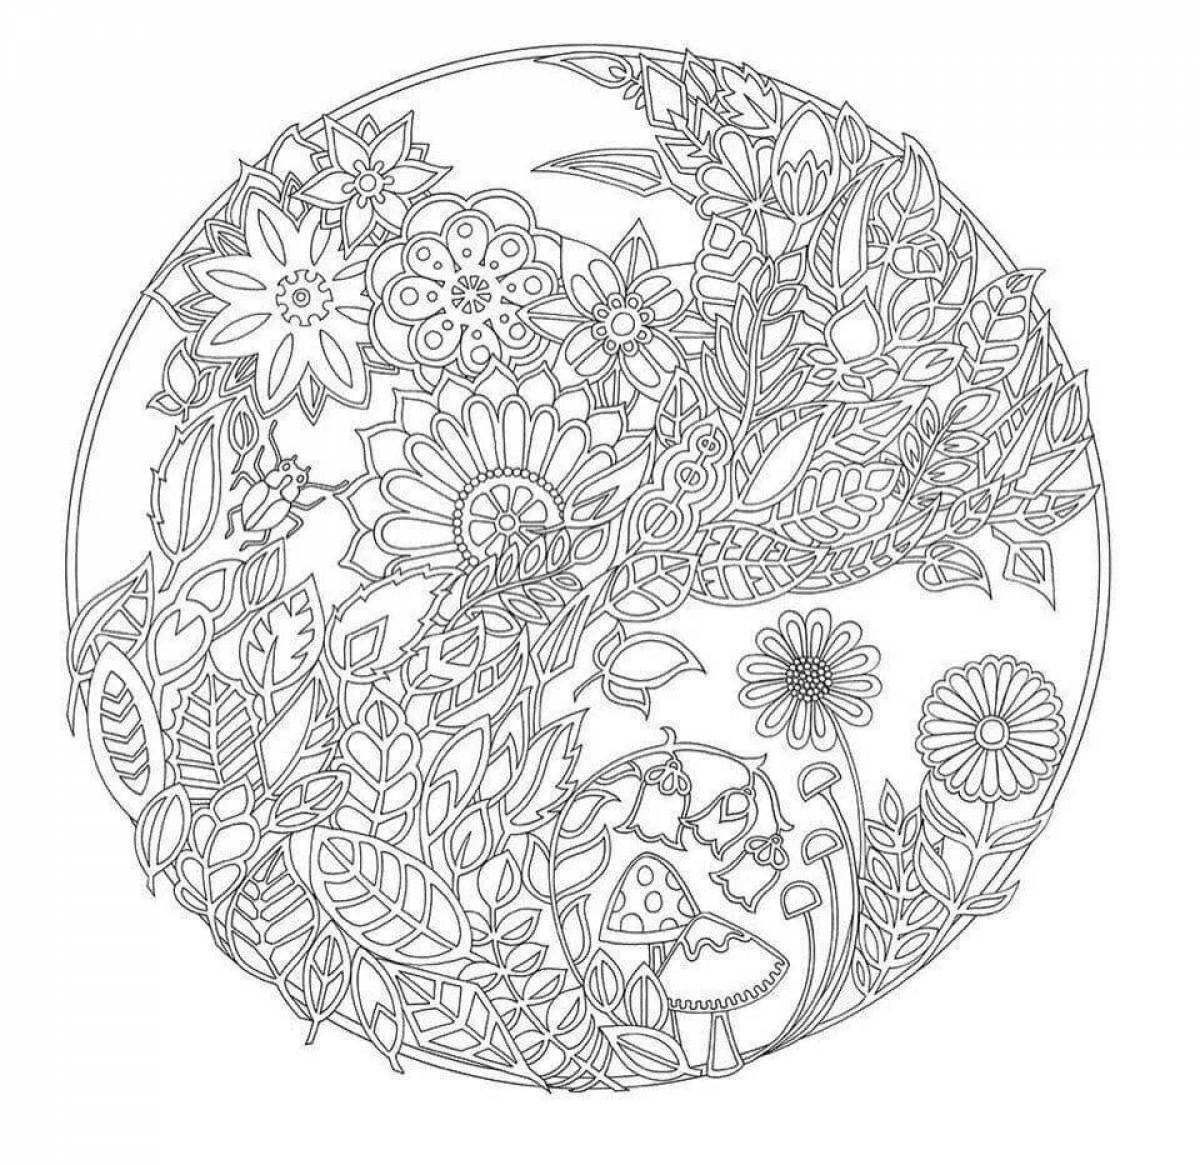 Luminous anti-stress forest coloring book